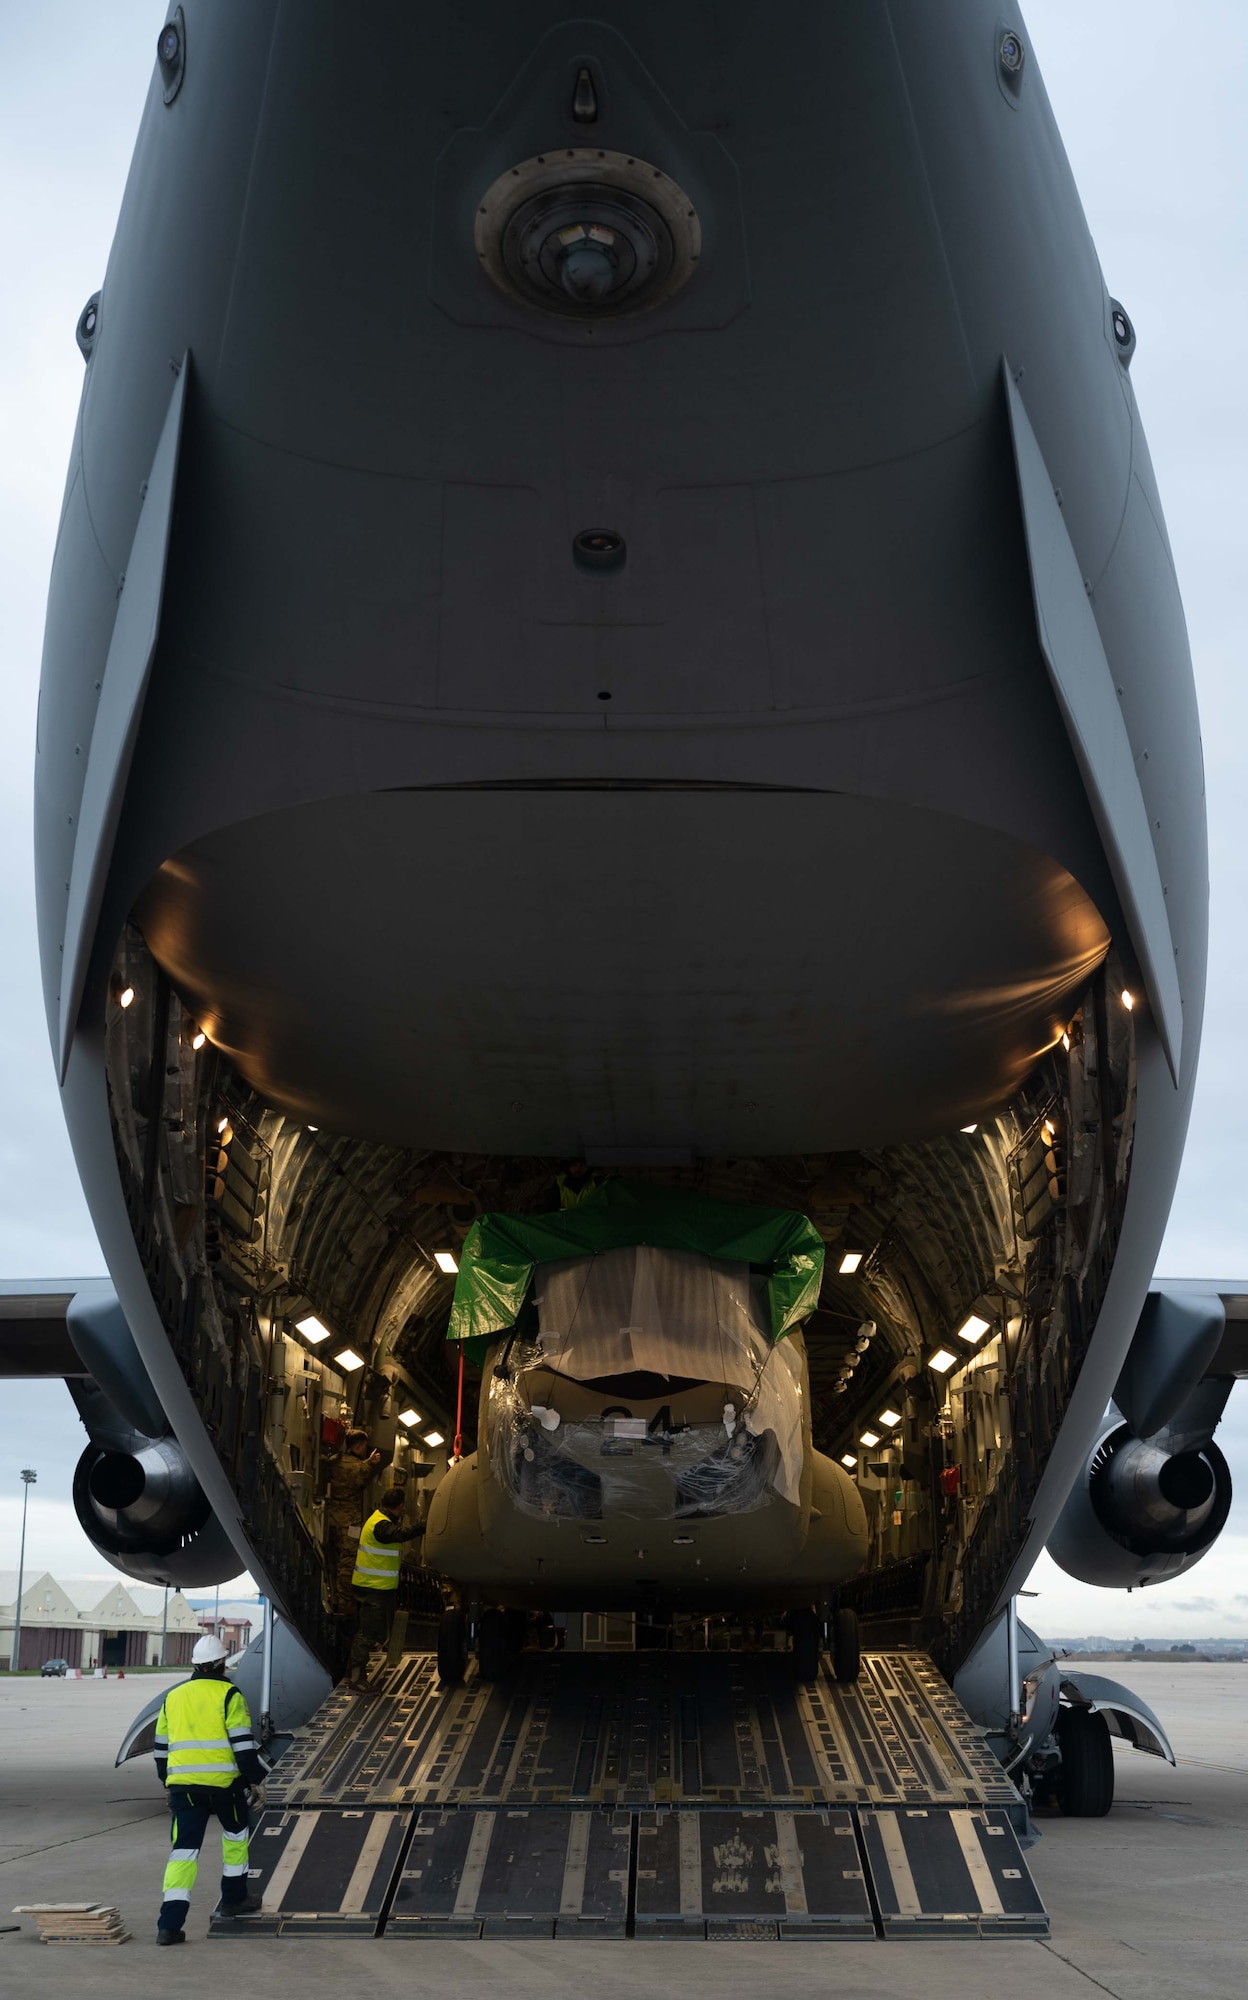 A CH-47F Chinook helicopter is unloaded from a C-17 Globemaster III assigned to Dover Air Force Base, Delaware, during a foreign military sales mission at Torrejón Air Base, Spain, Jan. 16, 2023. The helicopter was transported to Spain as a part of the Department of Defense’s FMS program. The United States and Spain are allies, strategic partners and friends. The bilateral relationship is based on deep historical ties, shared democratic values and a common vision for addressing global issues. (U.S. Air Force photo by Senior Airman Faith Barron)